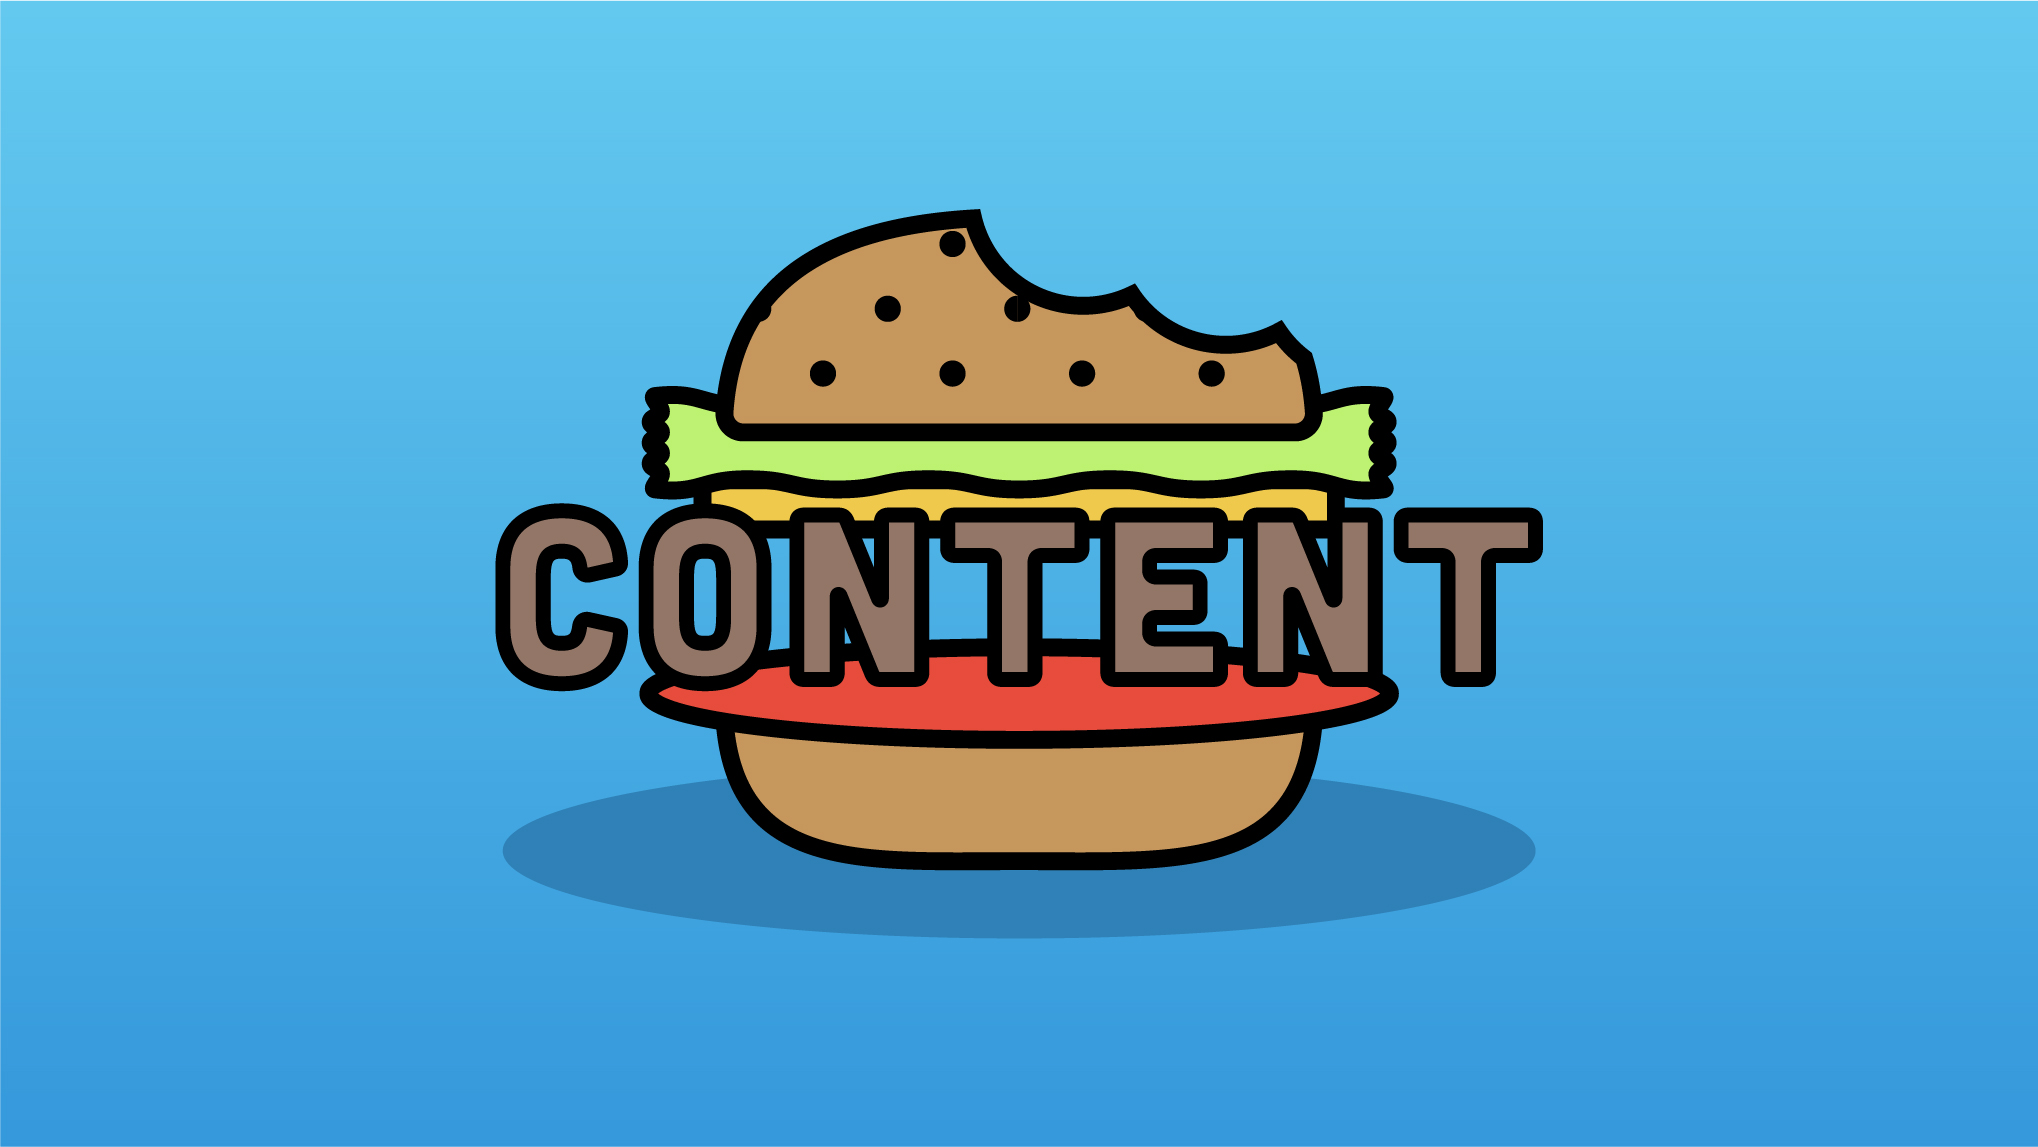 An illustrated hamburger with the word CONTENT in the middle